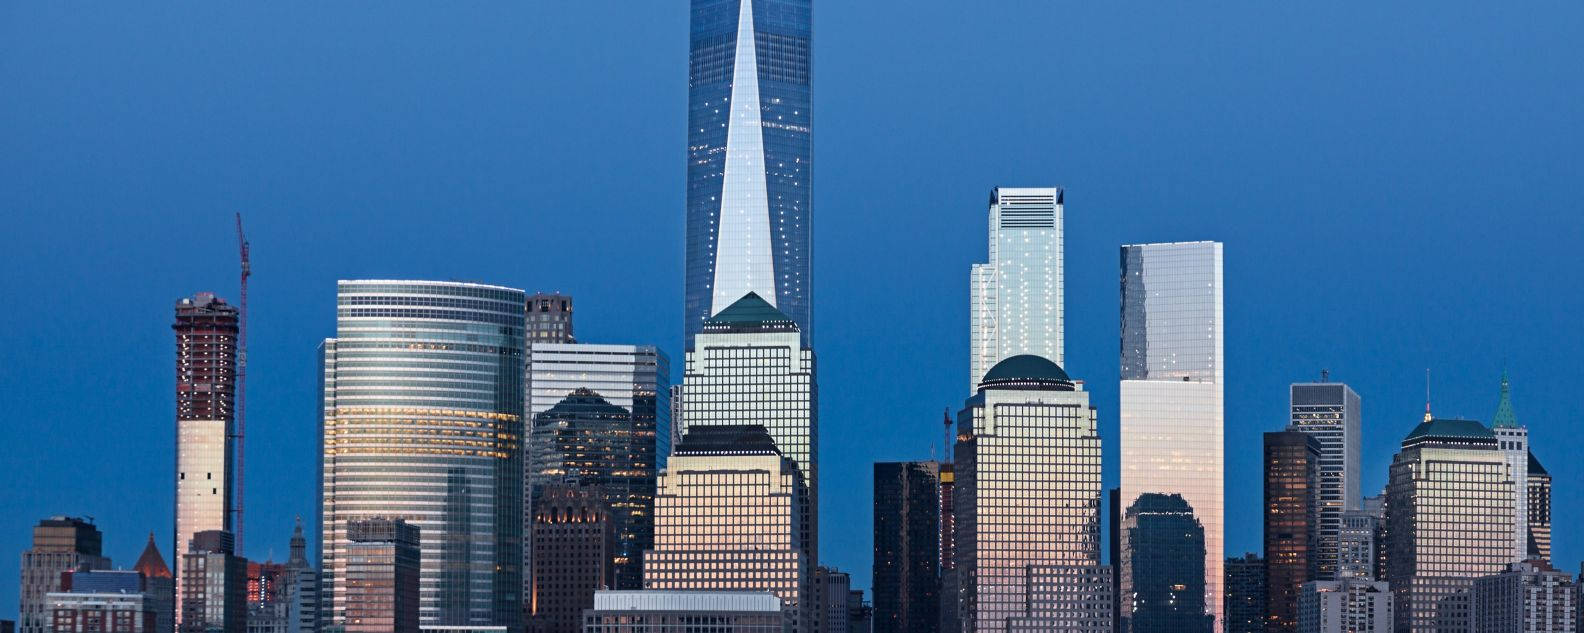 United States One World Trade Center With Buildings Wallpaper